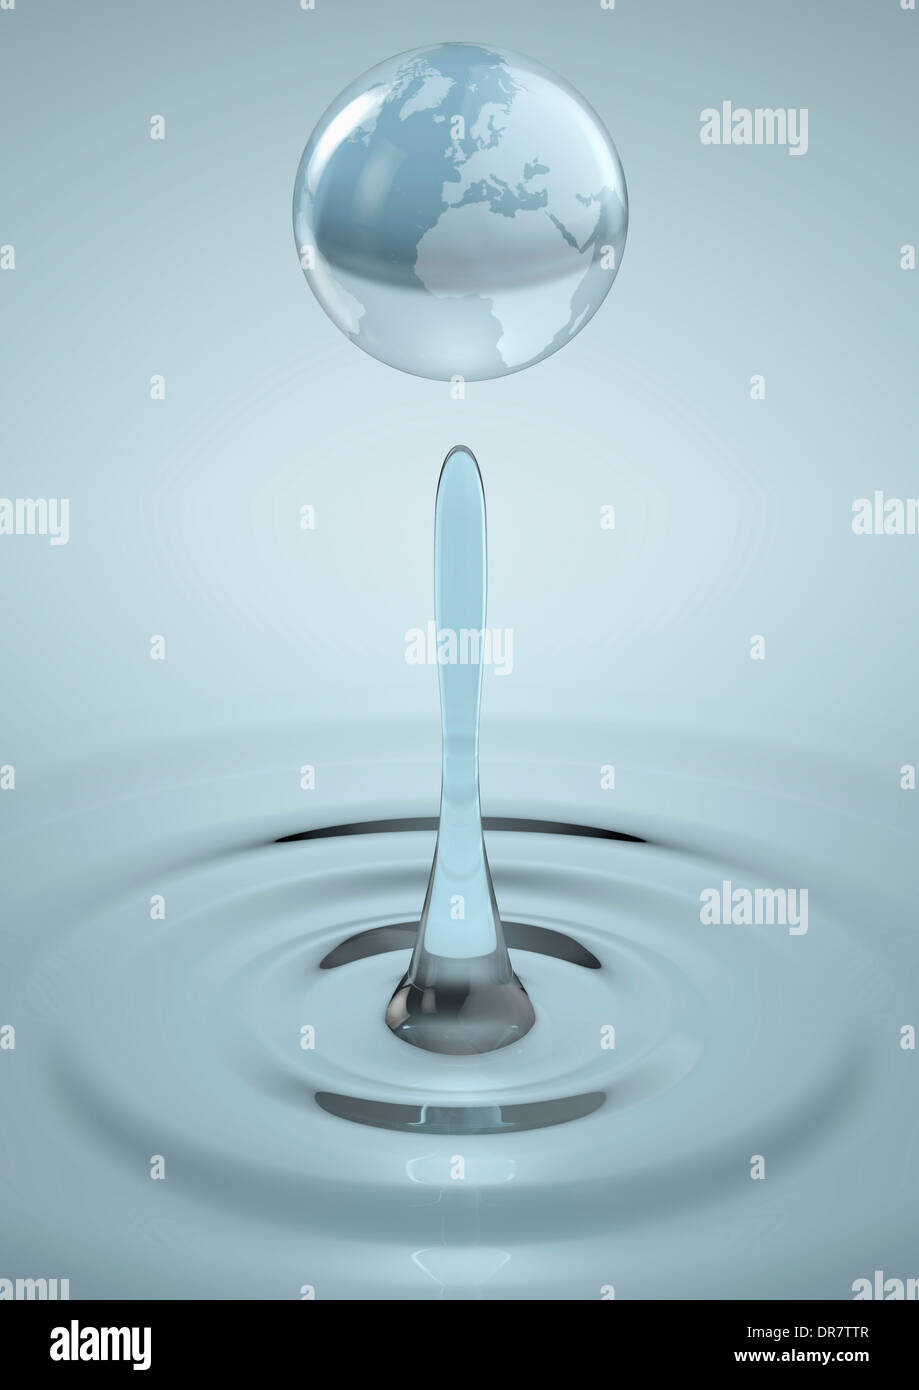 Planet Earth formed from a water droplet - Water conservation concept with focus on Europe and North Africa Stock Photo